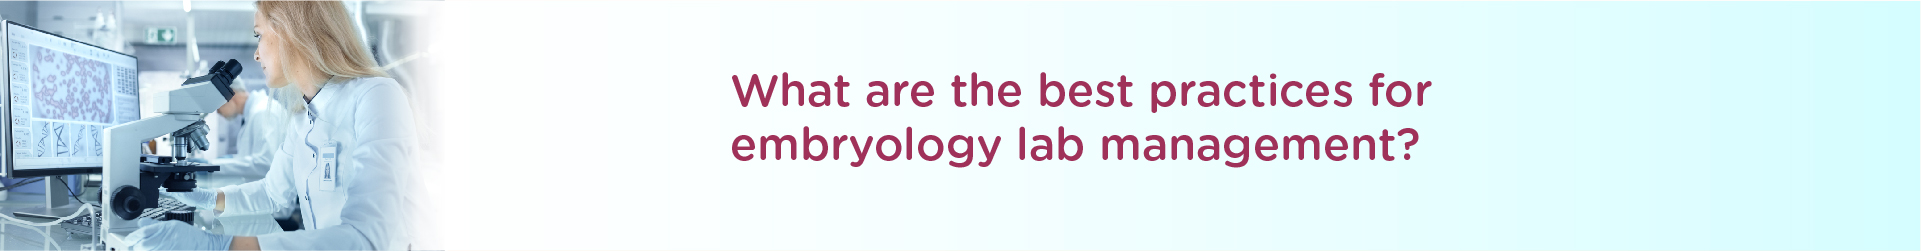 What are the Best Practices for Embryology Lab Management?